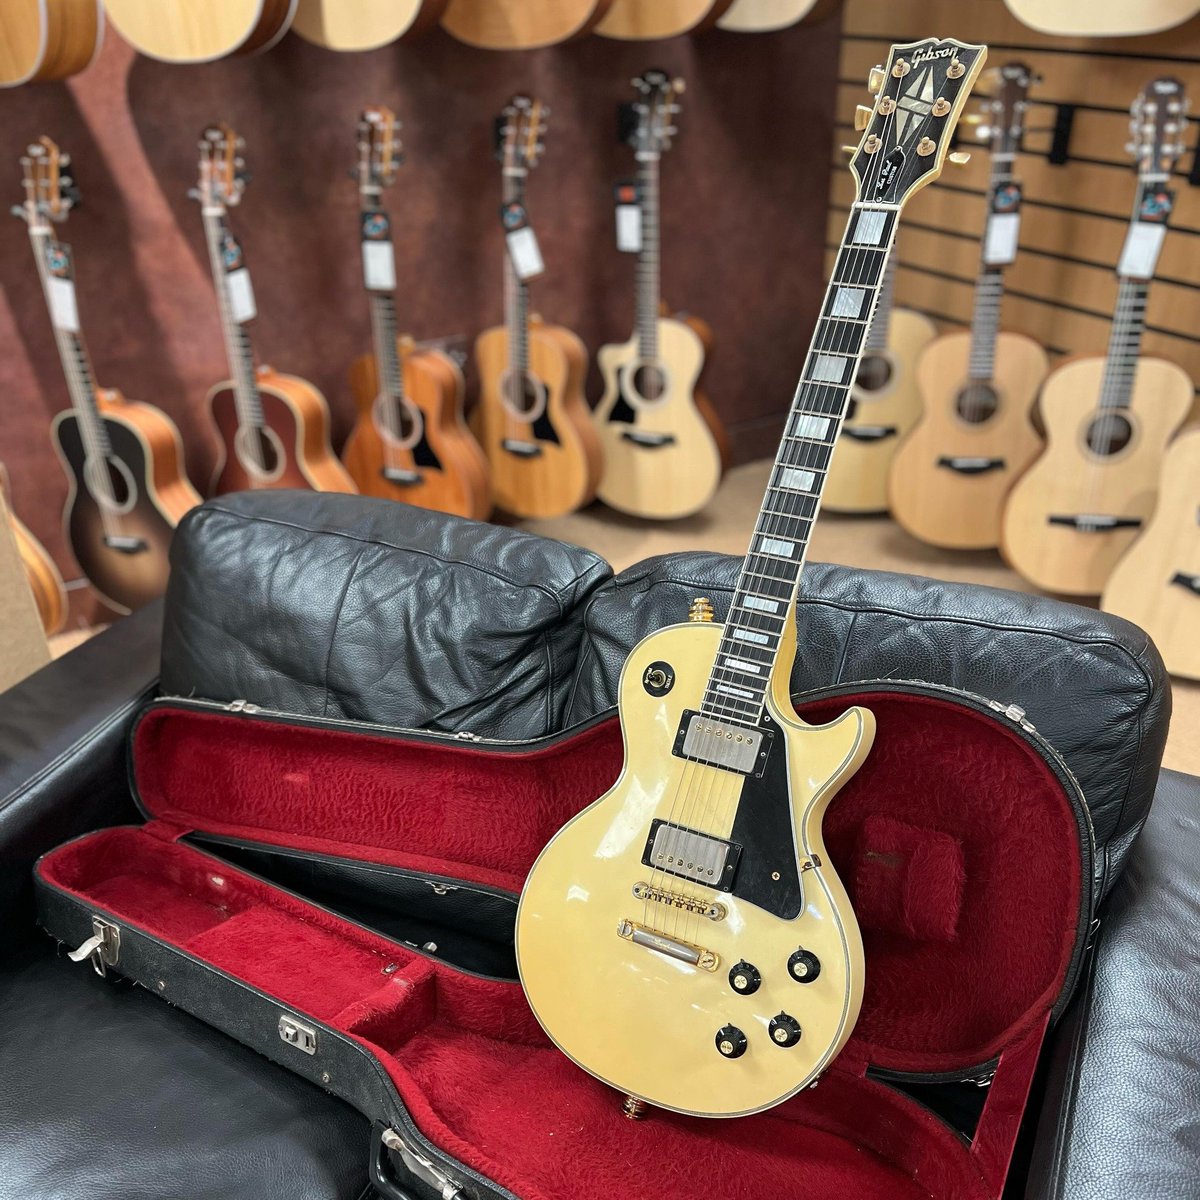 🤔 Steve Jones or Randy Rhoads - Who ROCKED it BETTER? 🎸🤘 Check out this stunning 1975 Les Paul Custom that found itself in our Newcastle store a few weeks back. Quite the stunner! 😍